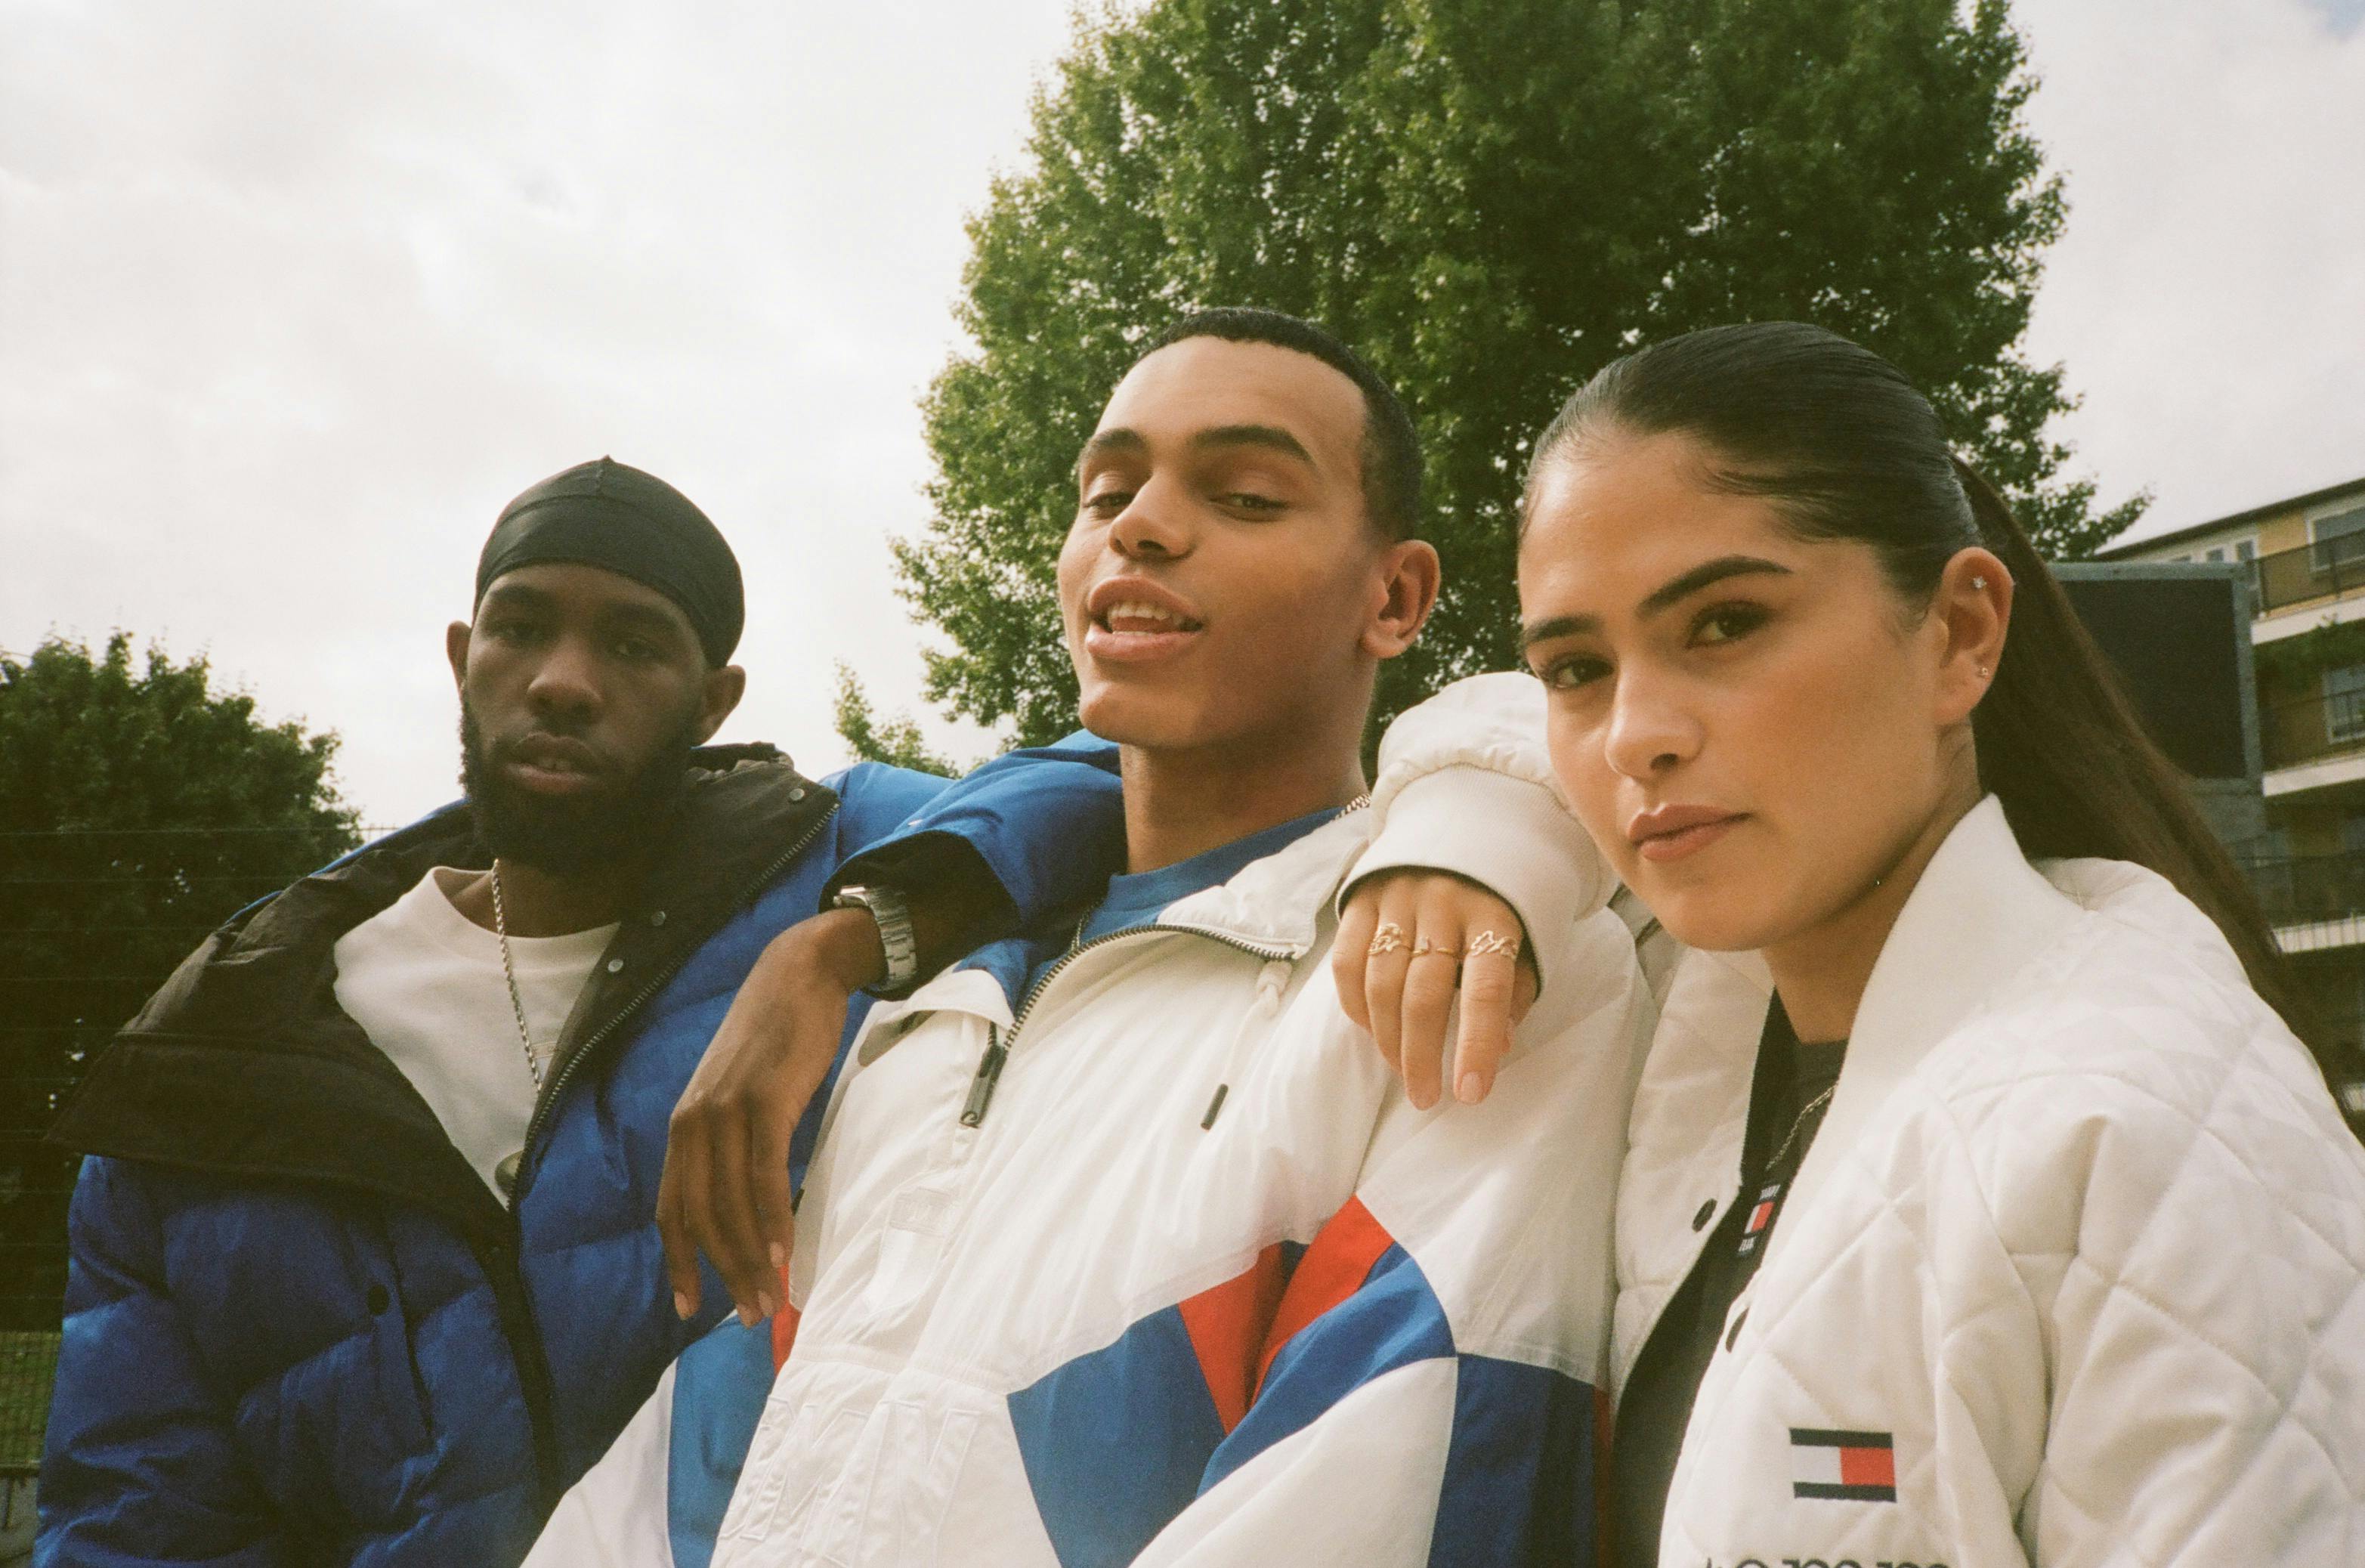 TOMMY JEANS' NEW HERITAGE ICONS | END.